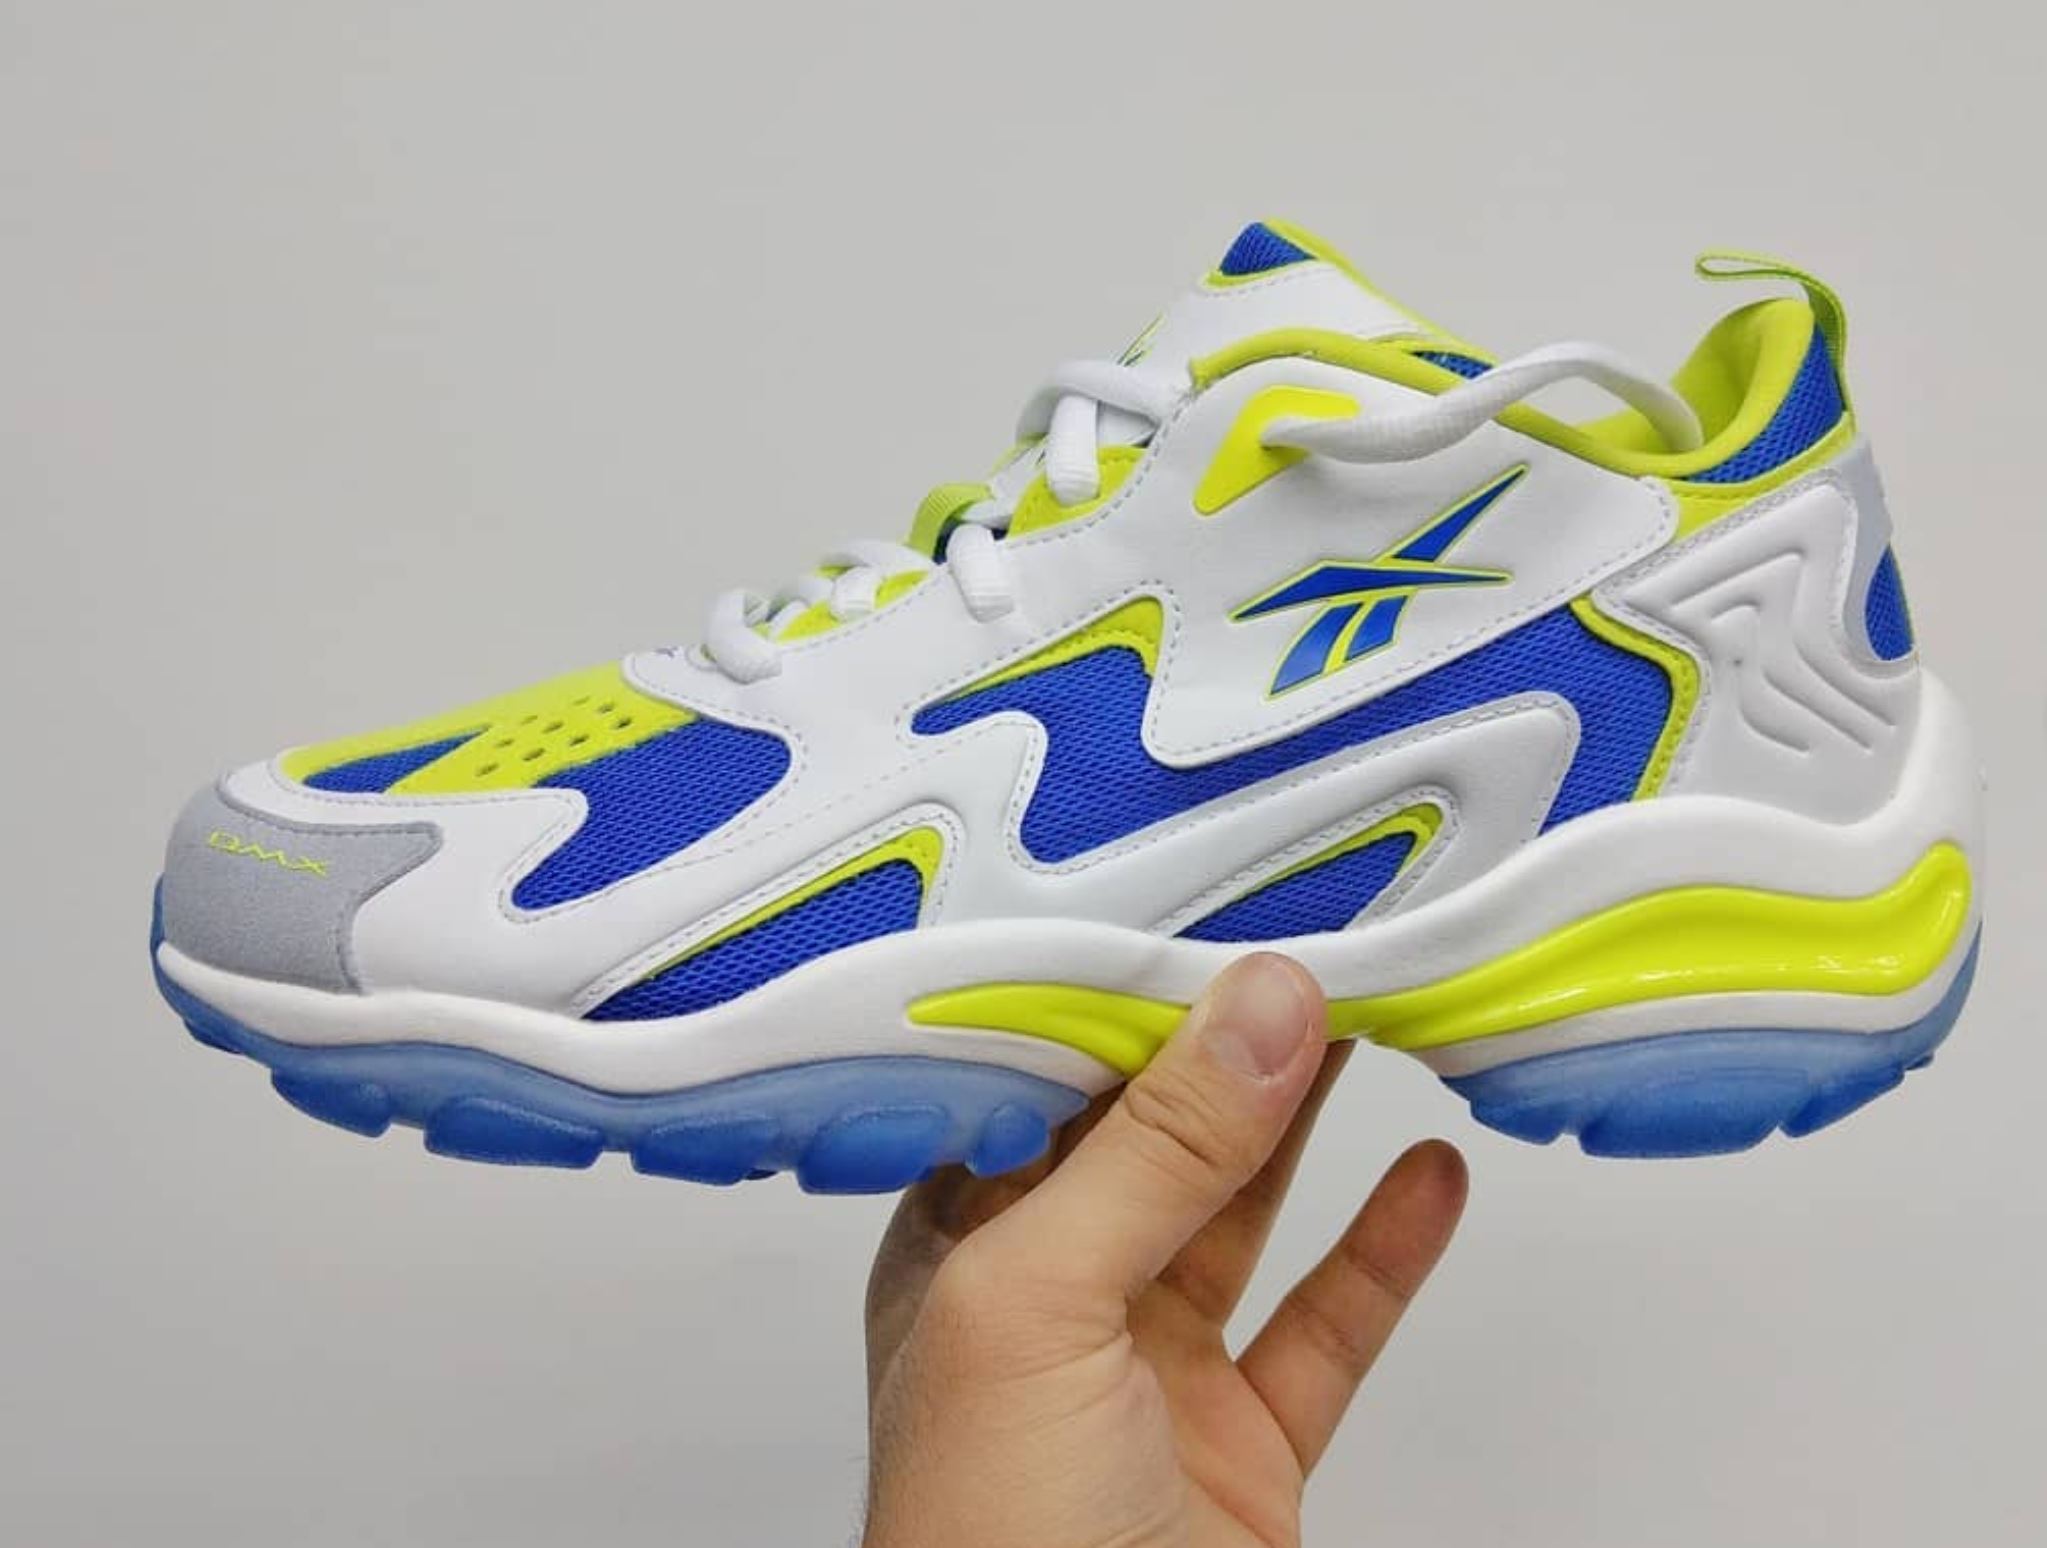 Exclusive: The Reebok DMX 1600 Celebrates the Reebok Archive - WearTesters